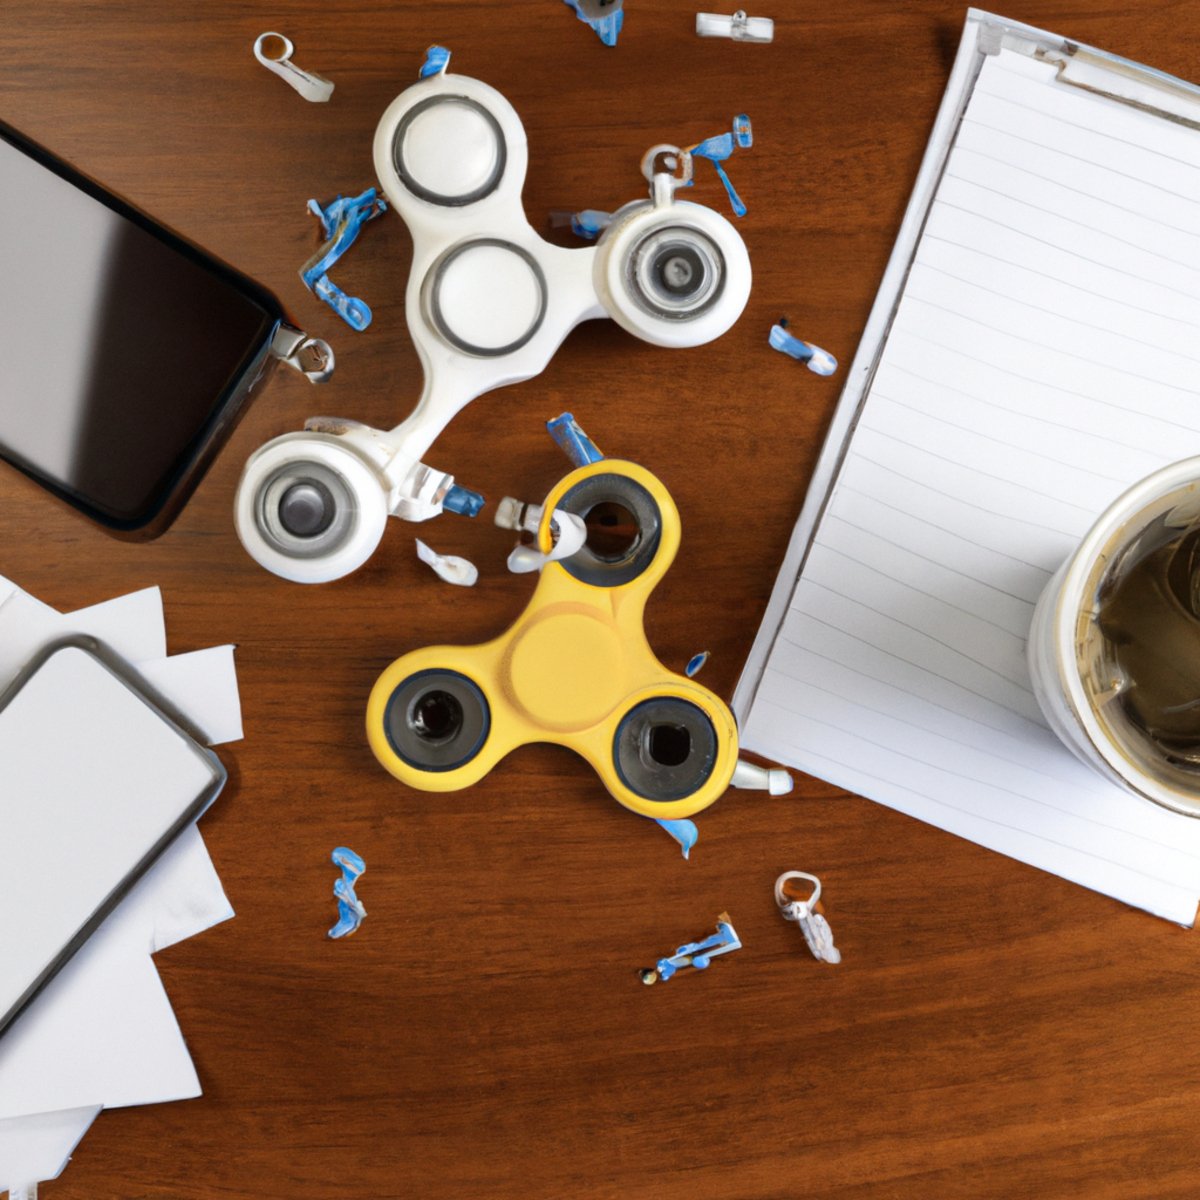 Cluttered desk with coffee mug, papers, stress ball, fidget spinner, computer, phone, and notepad, highlighting importance of stress management.